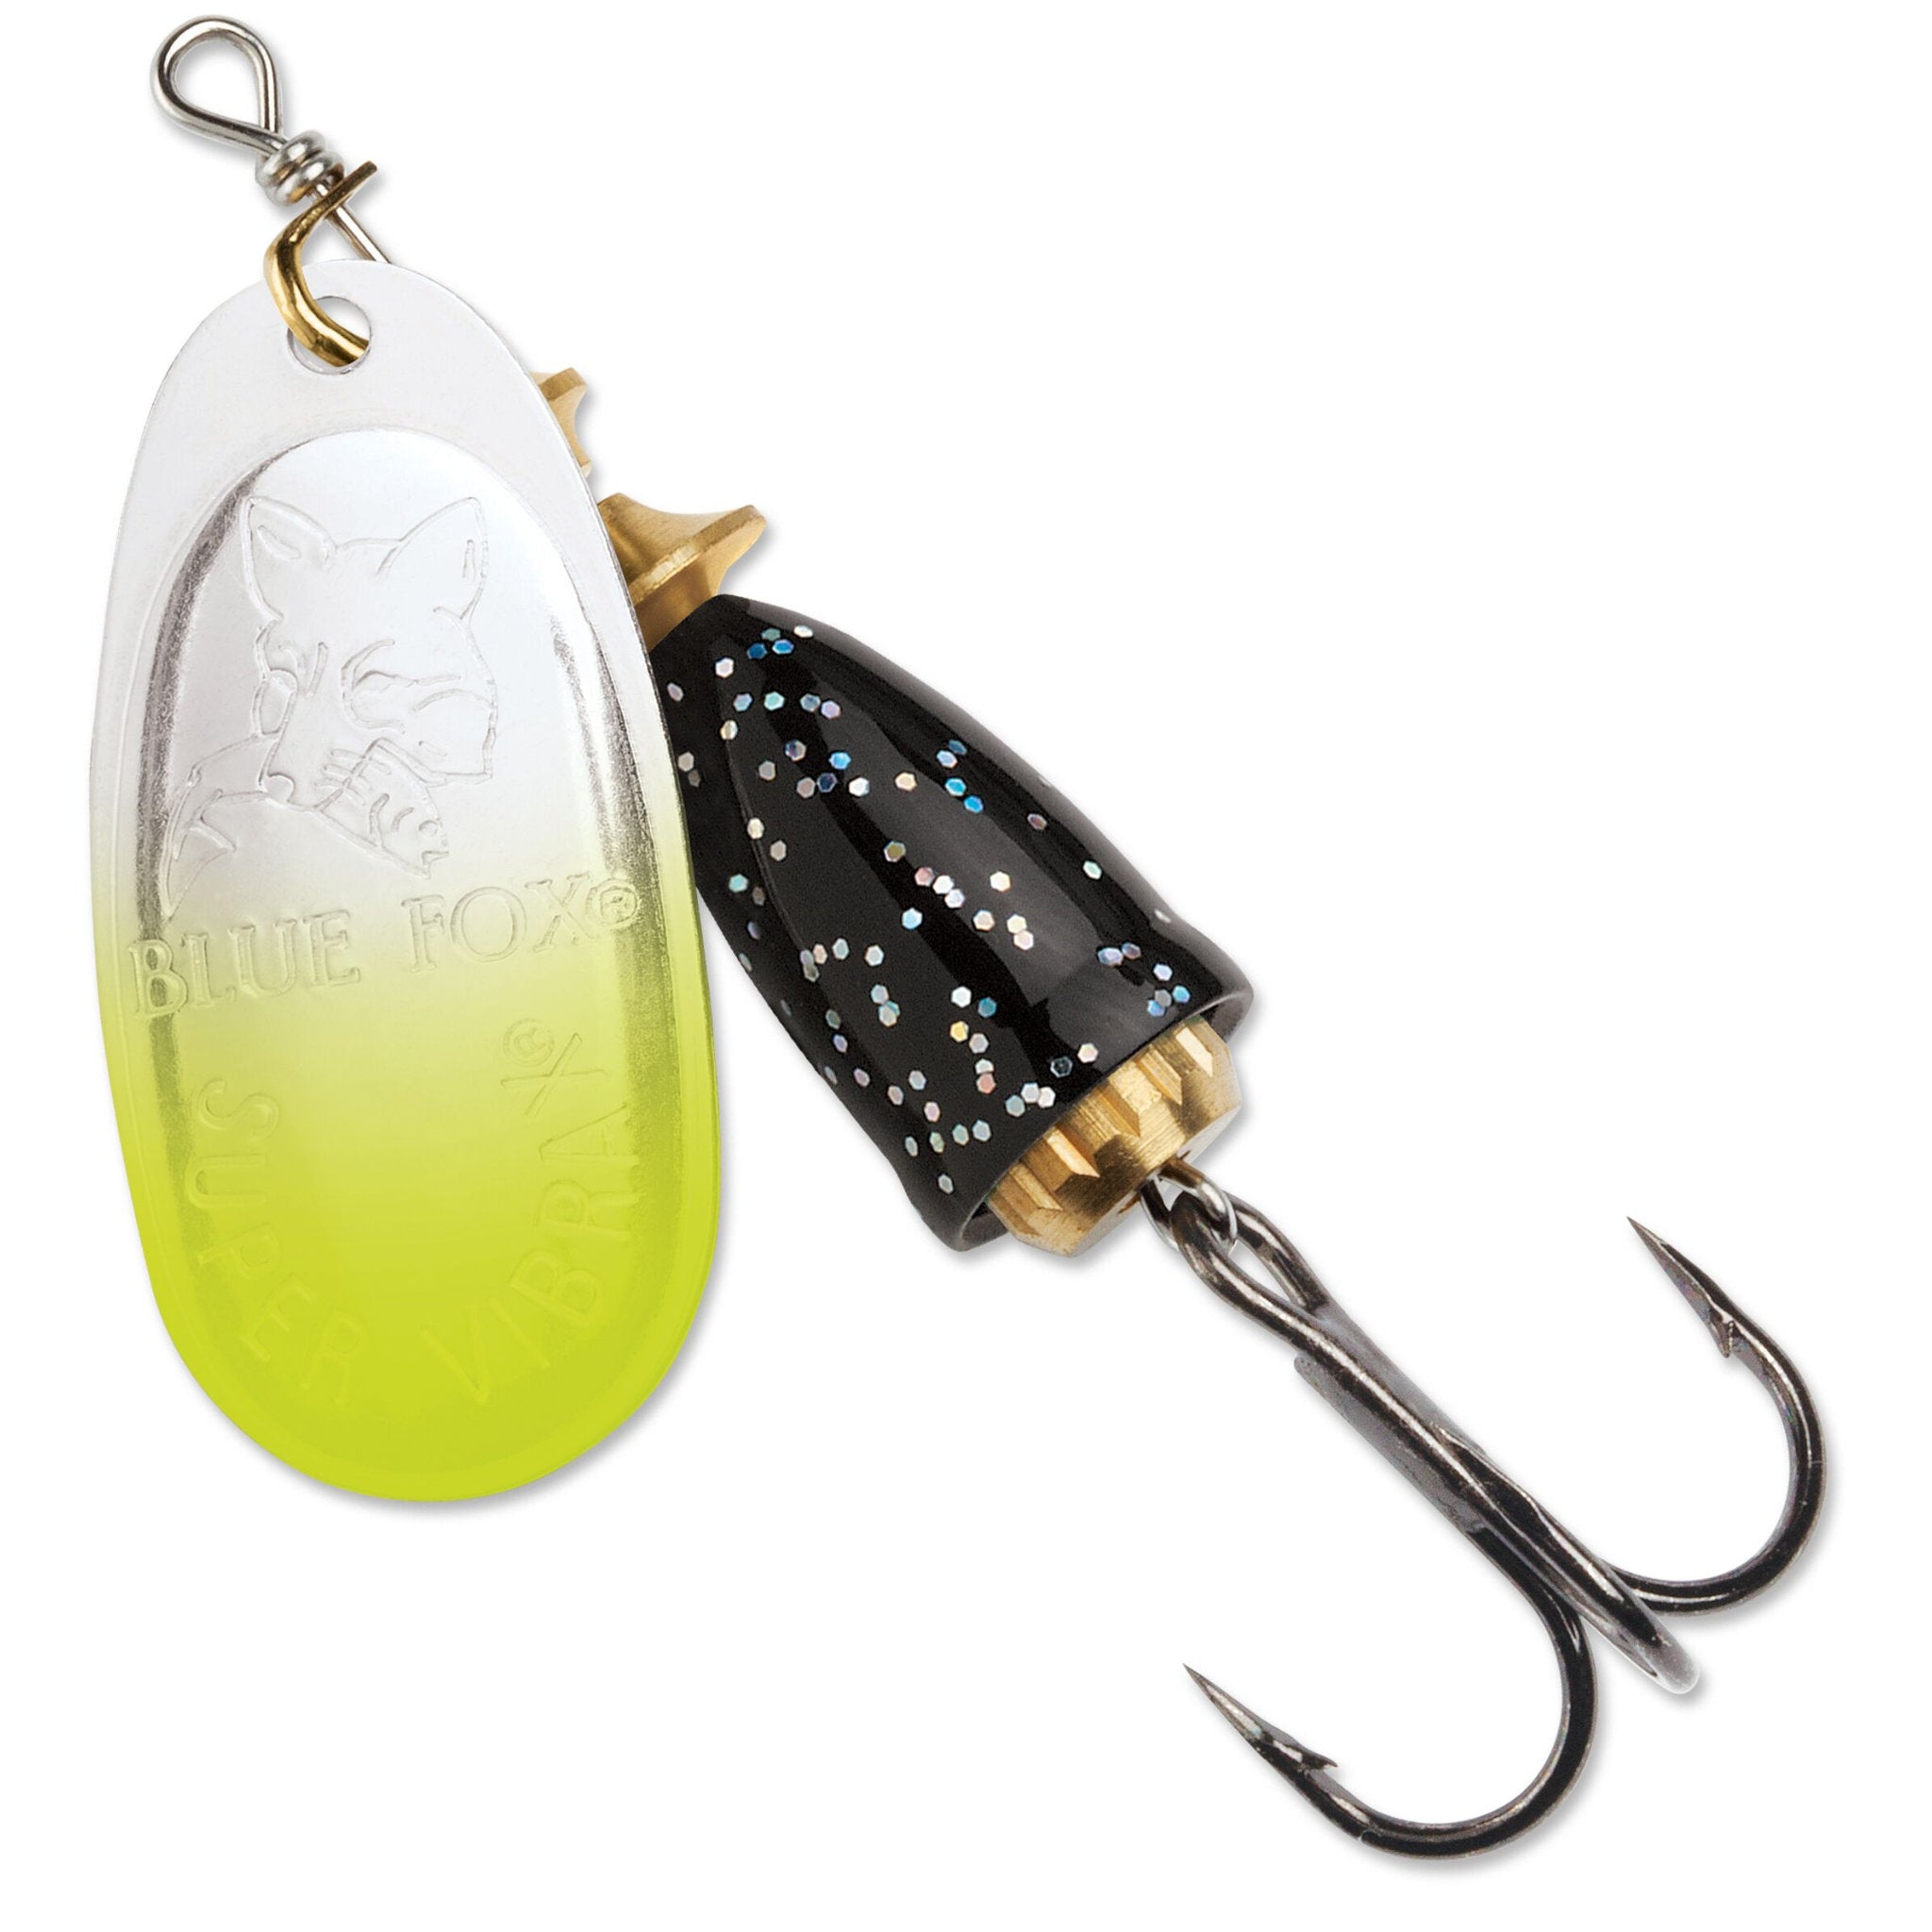 Blue Fox Vibrax Fluorescent Inline Spinners – Natural Sports - The